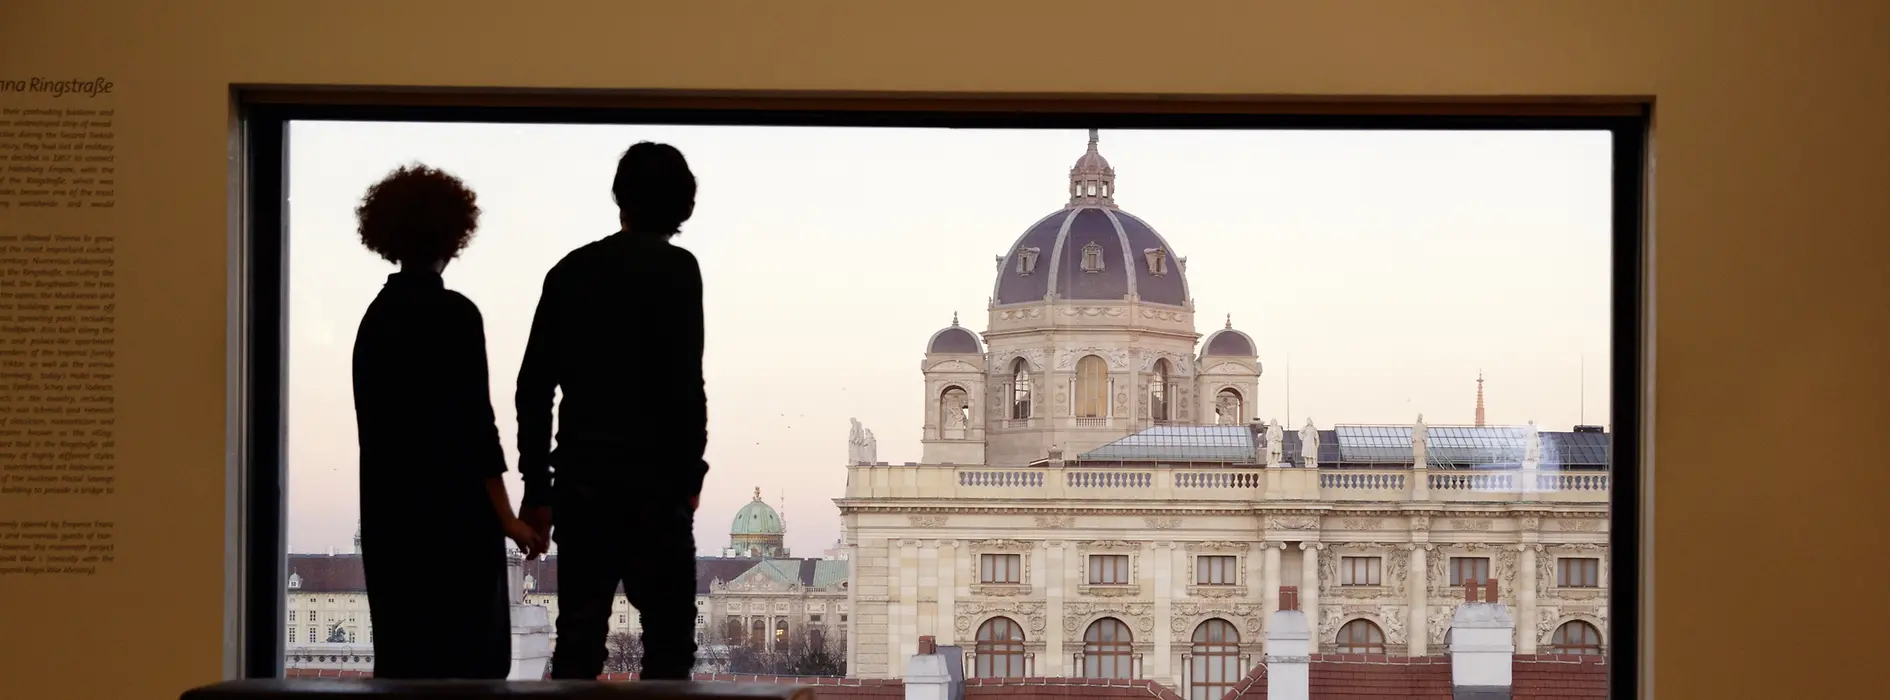 2 people in front of a big window looking at the Kunsthistorische Musem